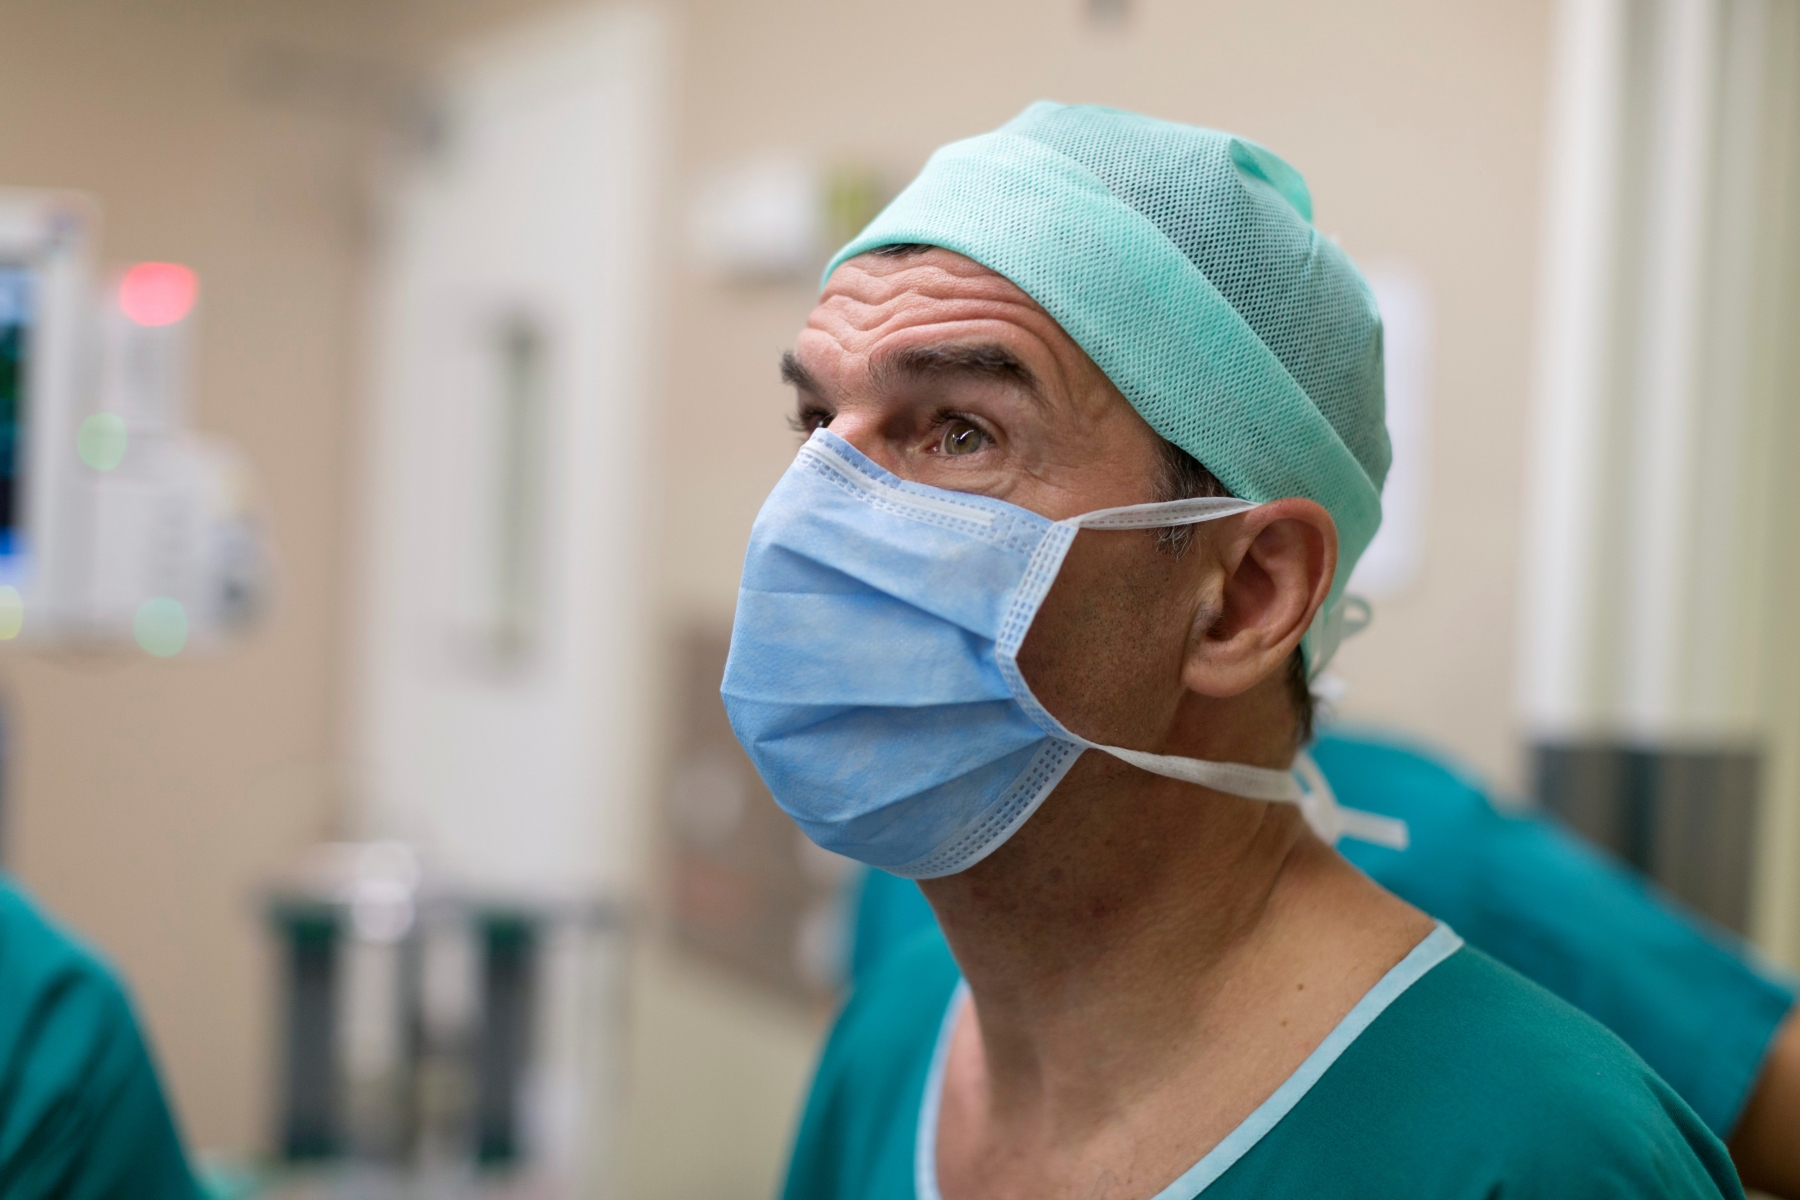 Swiss heart surgeon and pediatrician Rene Pretre pictured before performing cardiac surgery on a two-year-old child at the Lausanne University Hospital, Centre Hospitalier Universitaire Vaudois, CHUV, in Lausanne, Canton of Vaud, Switzerland, on August 23, 2016. (KEYSTONE/Gaetan Bally) SCHWEIZ LAUSANNE UNIVERSITAETSSPITAL